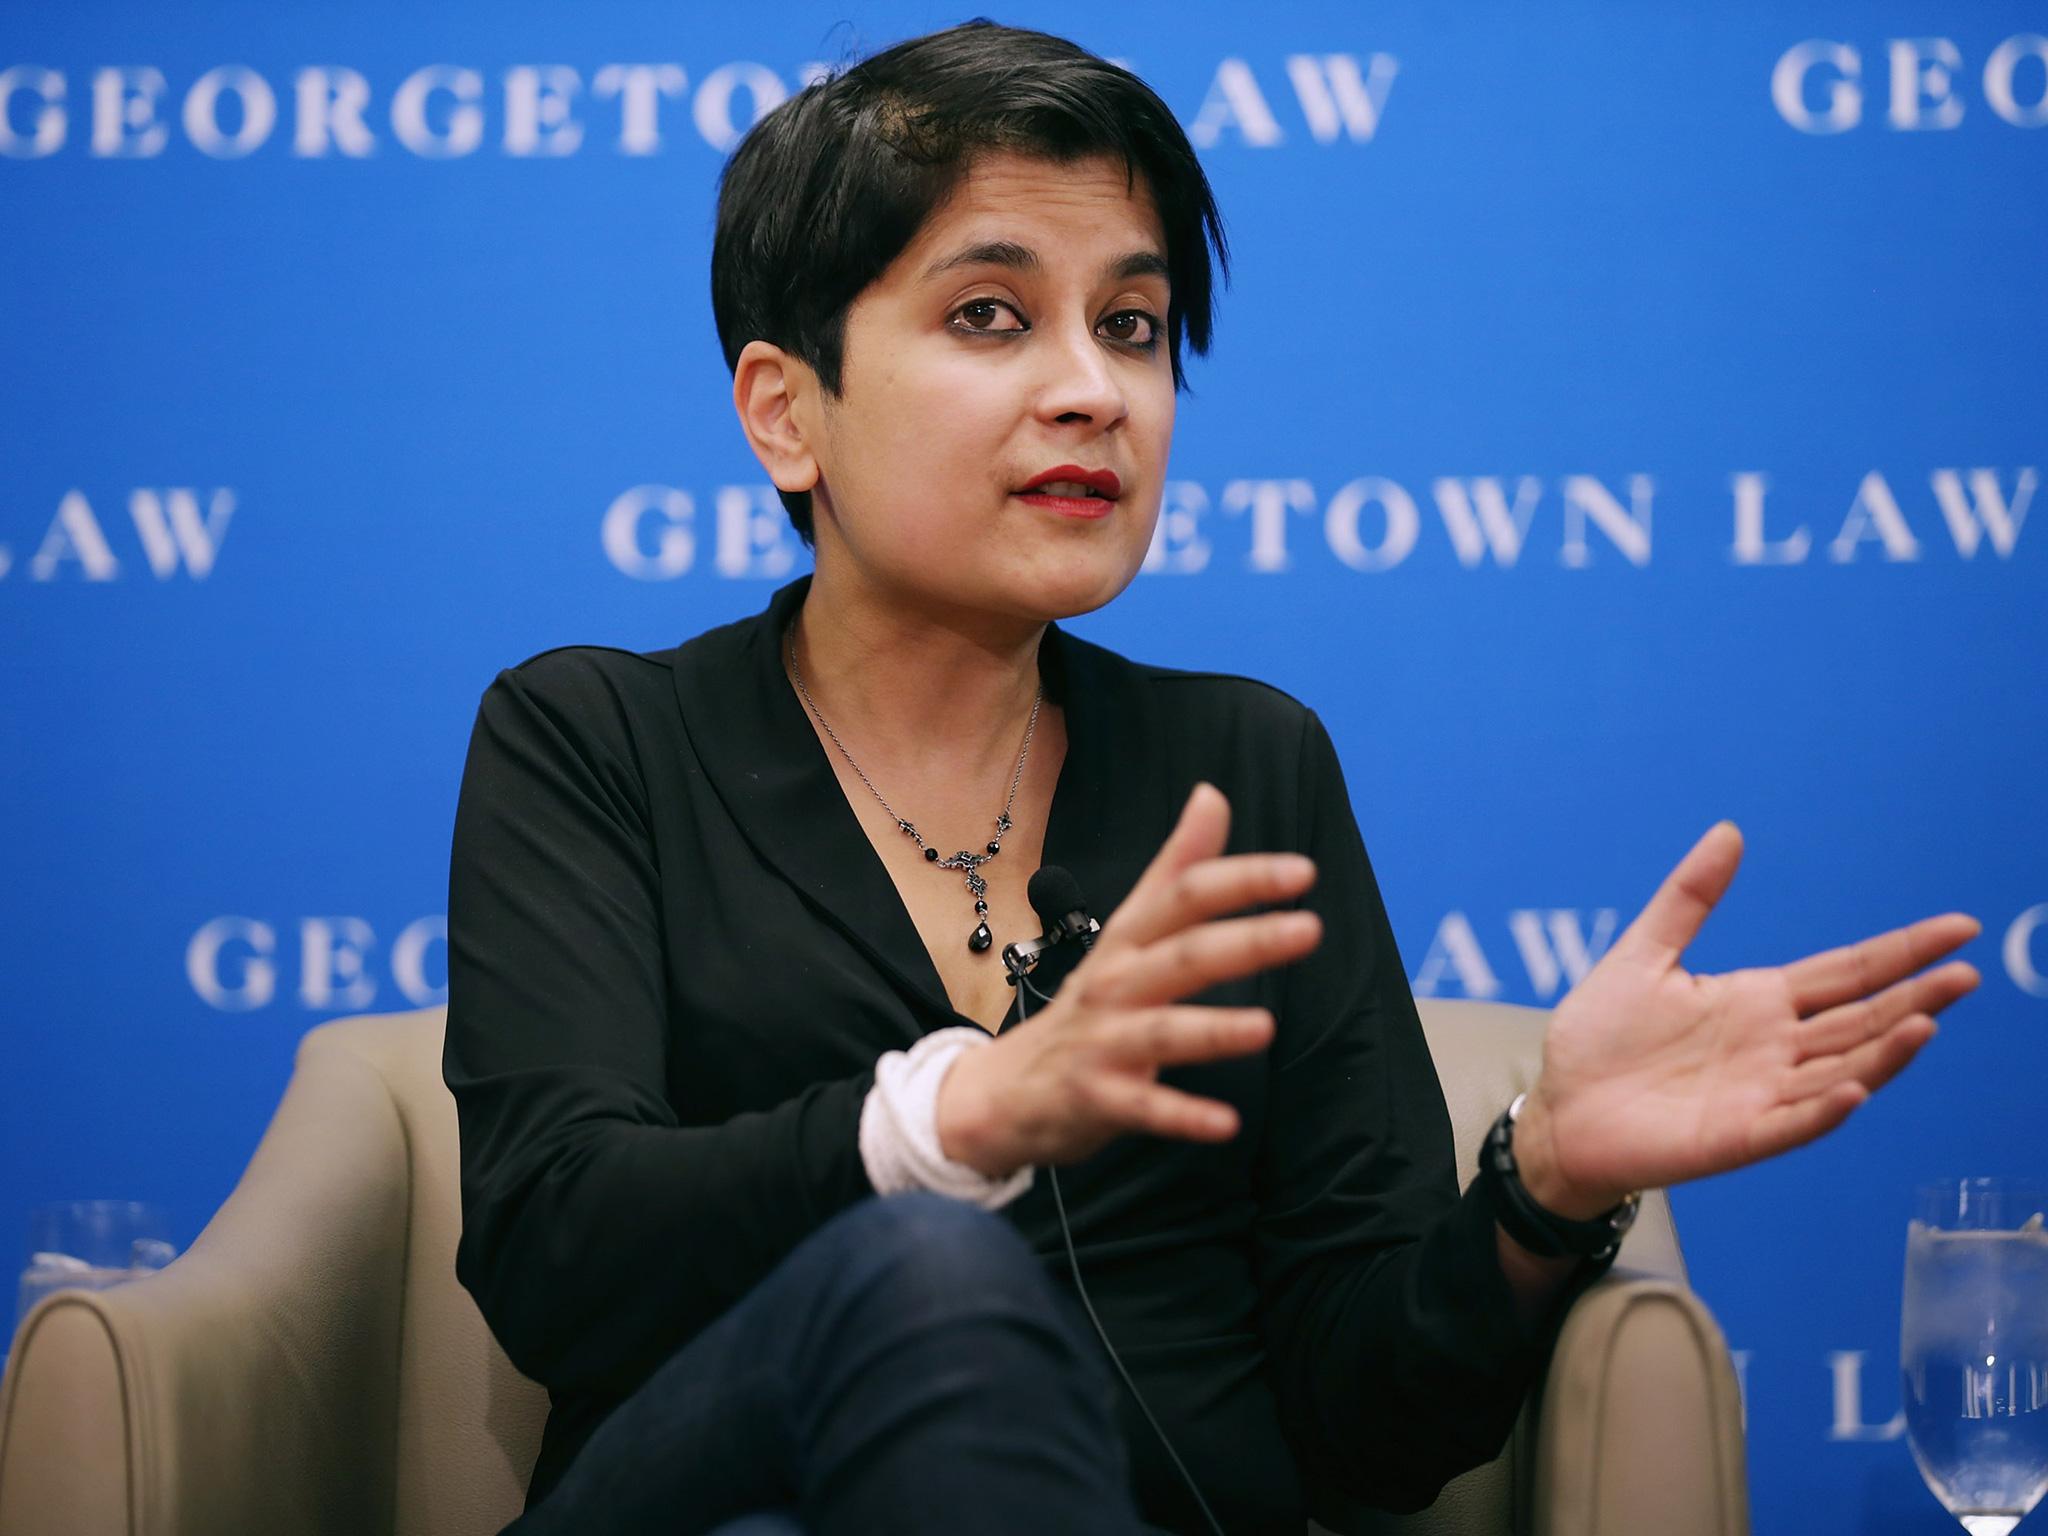 Just six months ago, Shami Chakrabarti said the Government must ‘return to the drawing board’ on the Investigatory Powers Bill